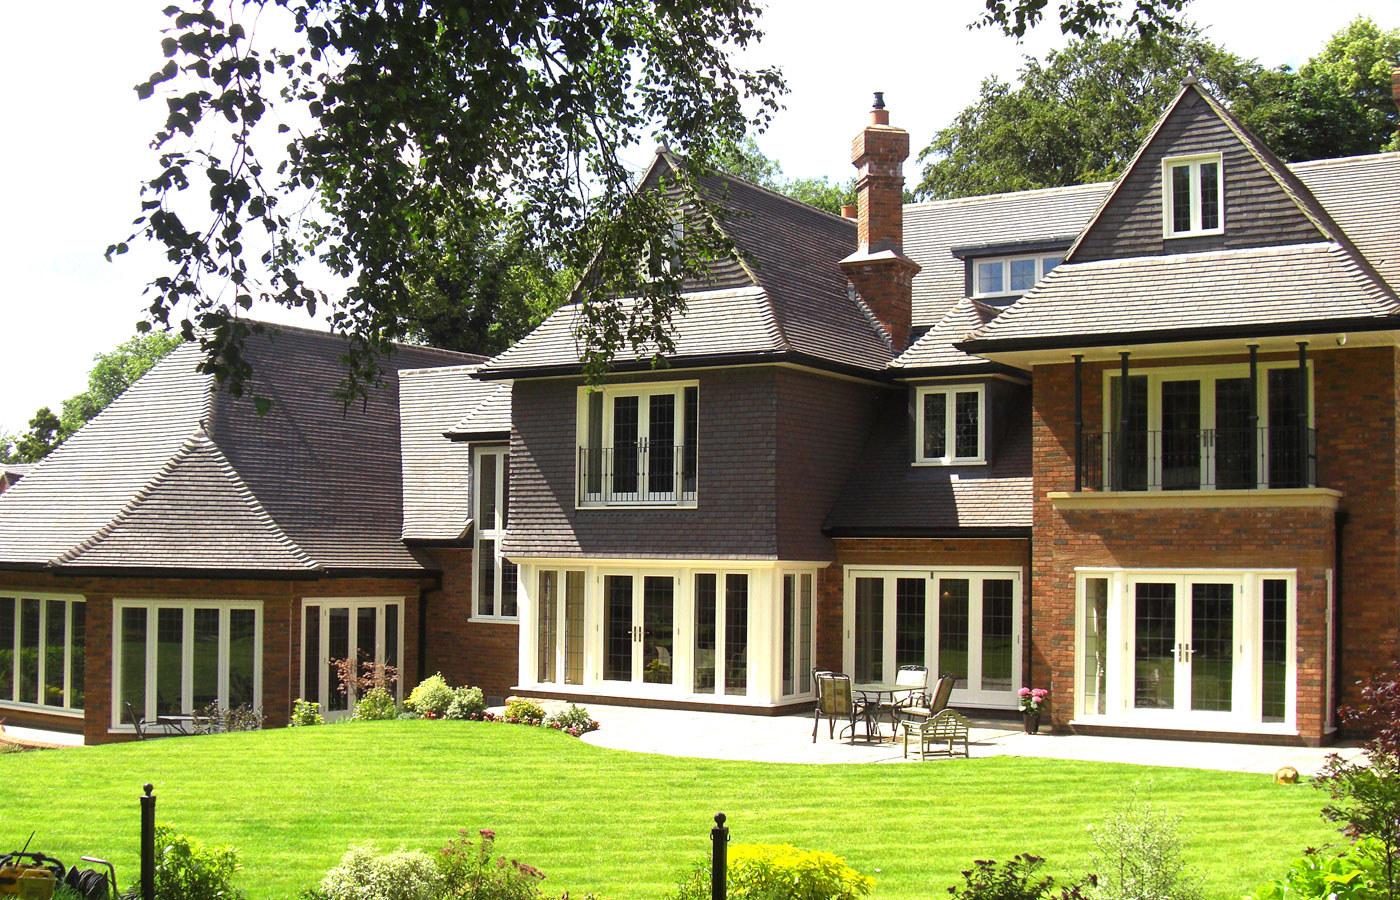 new build Sutton Coldfield.Energy efficient arts & crafts style house, planning application, Architectural design by JFA Qube